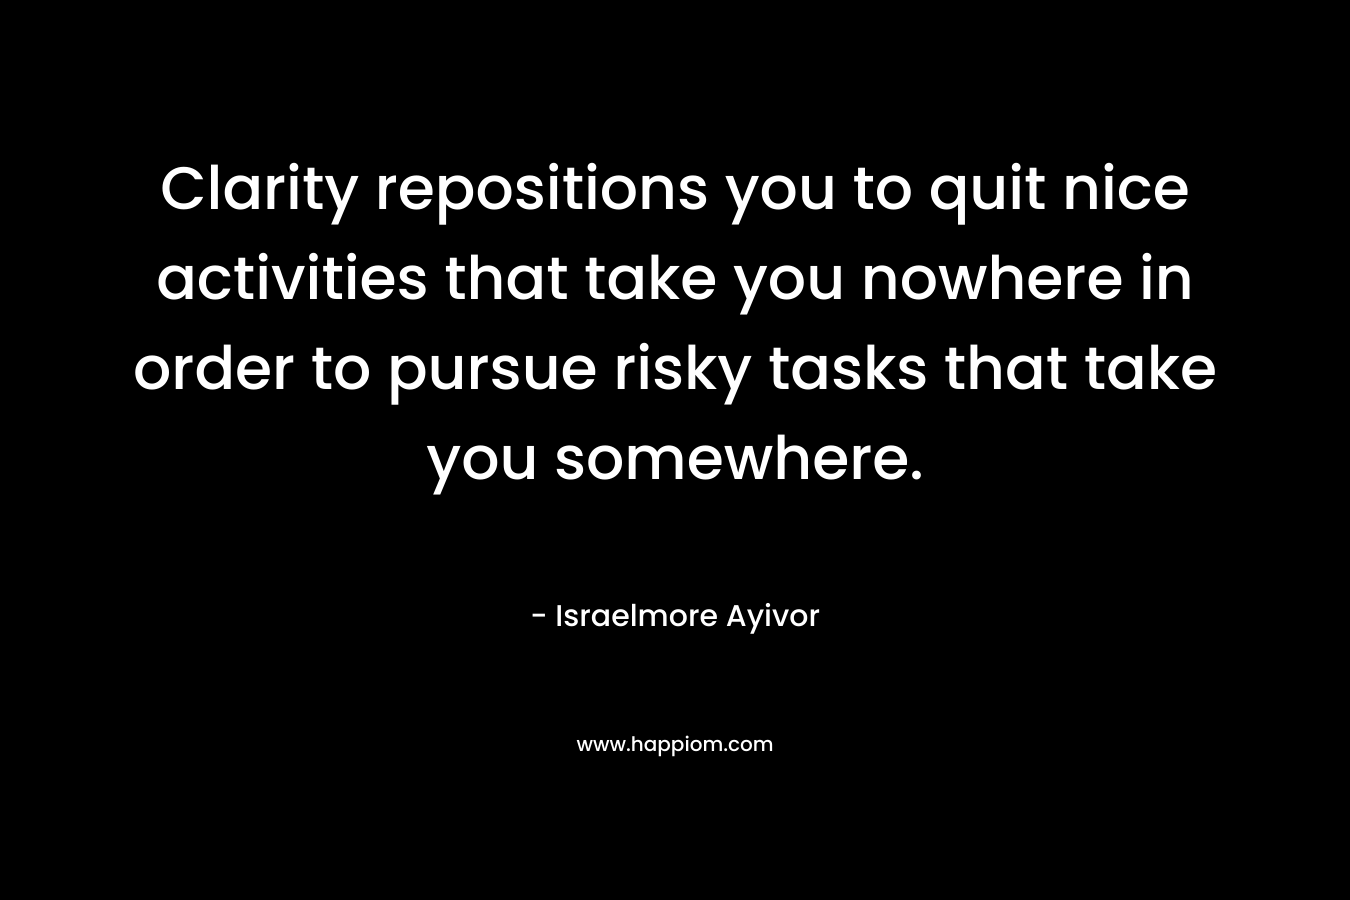 Clarity repositions you to quit nice activities that take you nowhere in order to pursue risky tasks that take you somewhere.